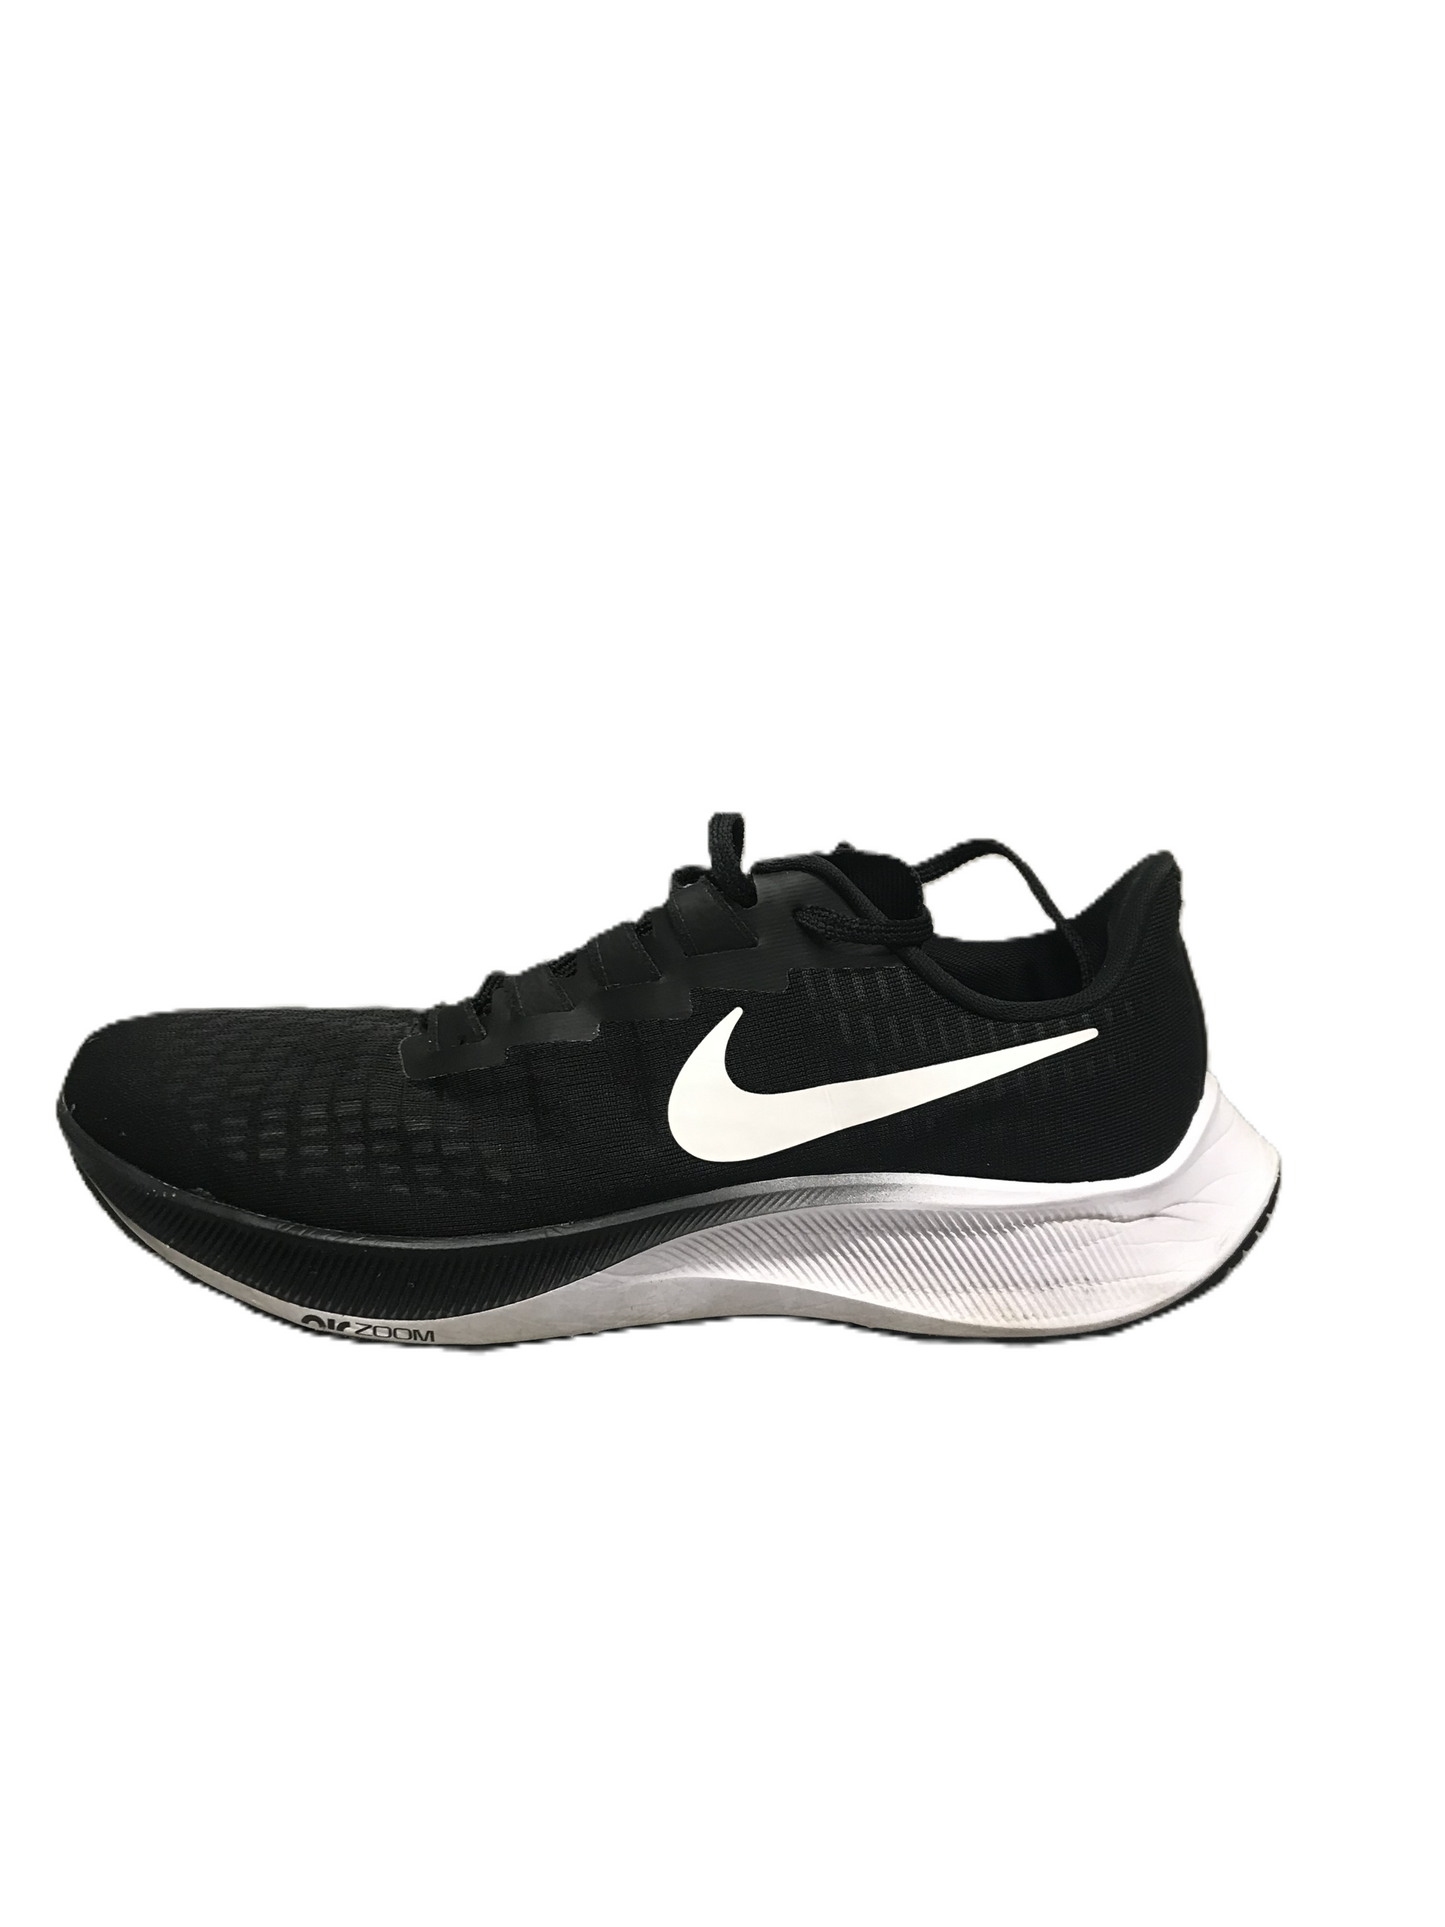 Black Shoes Athletic By Nike, Size: 9.5